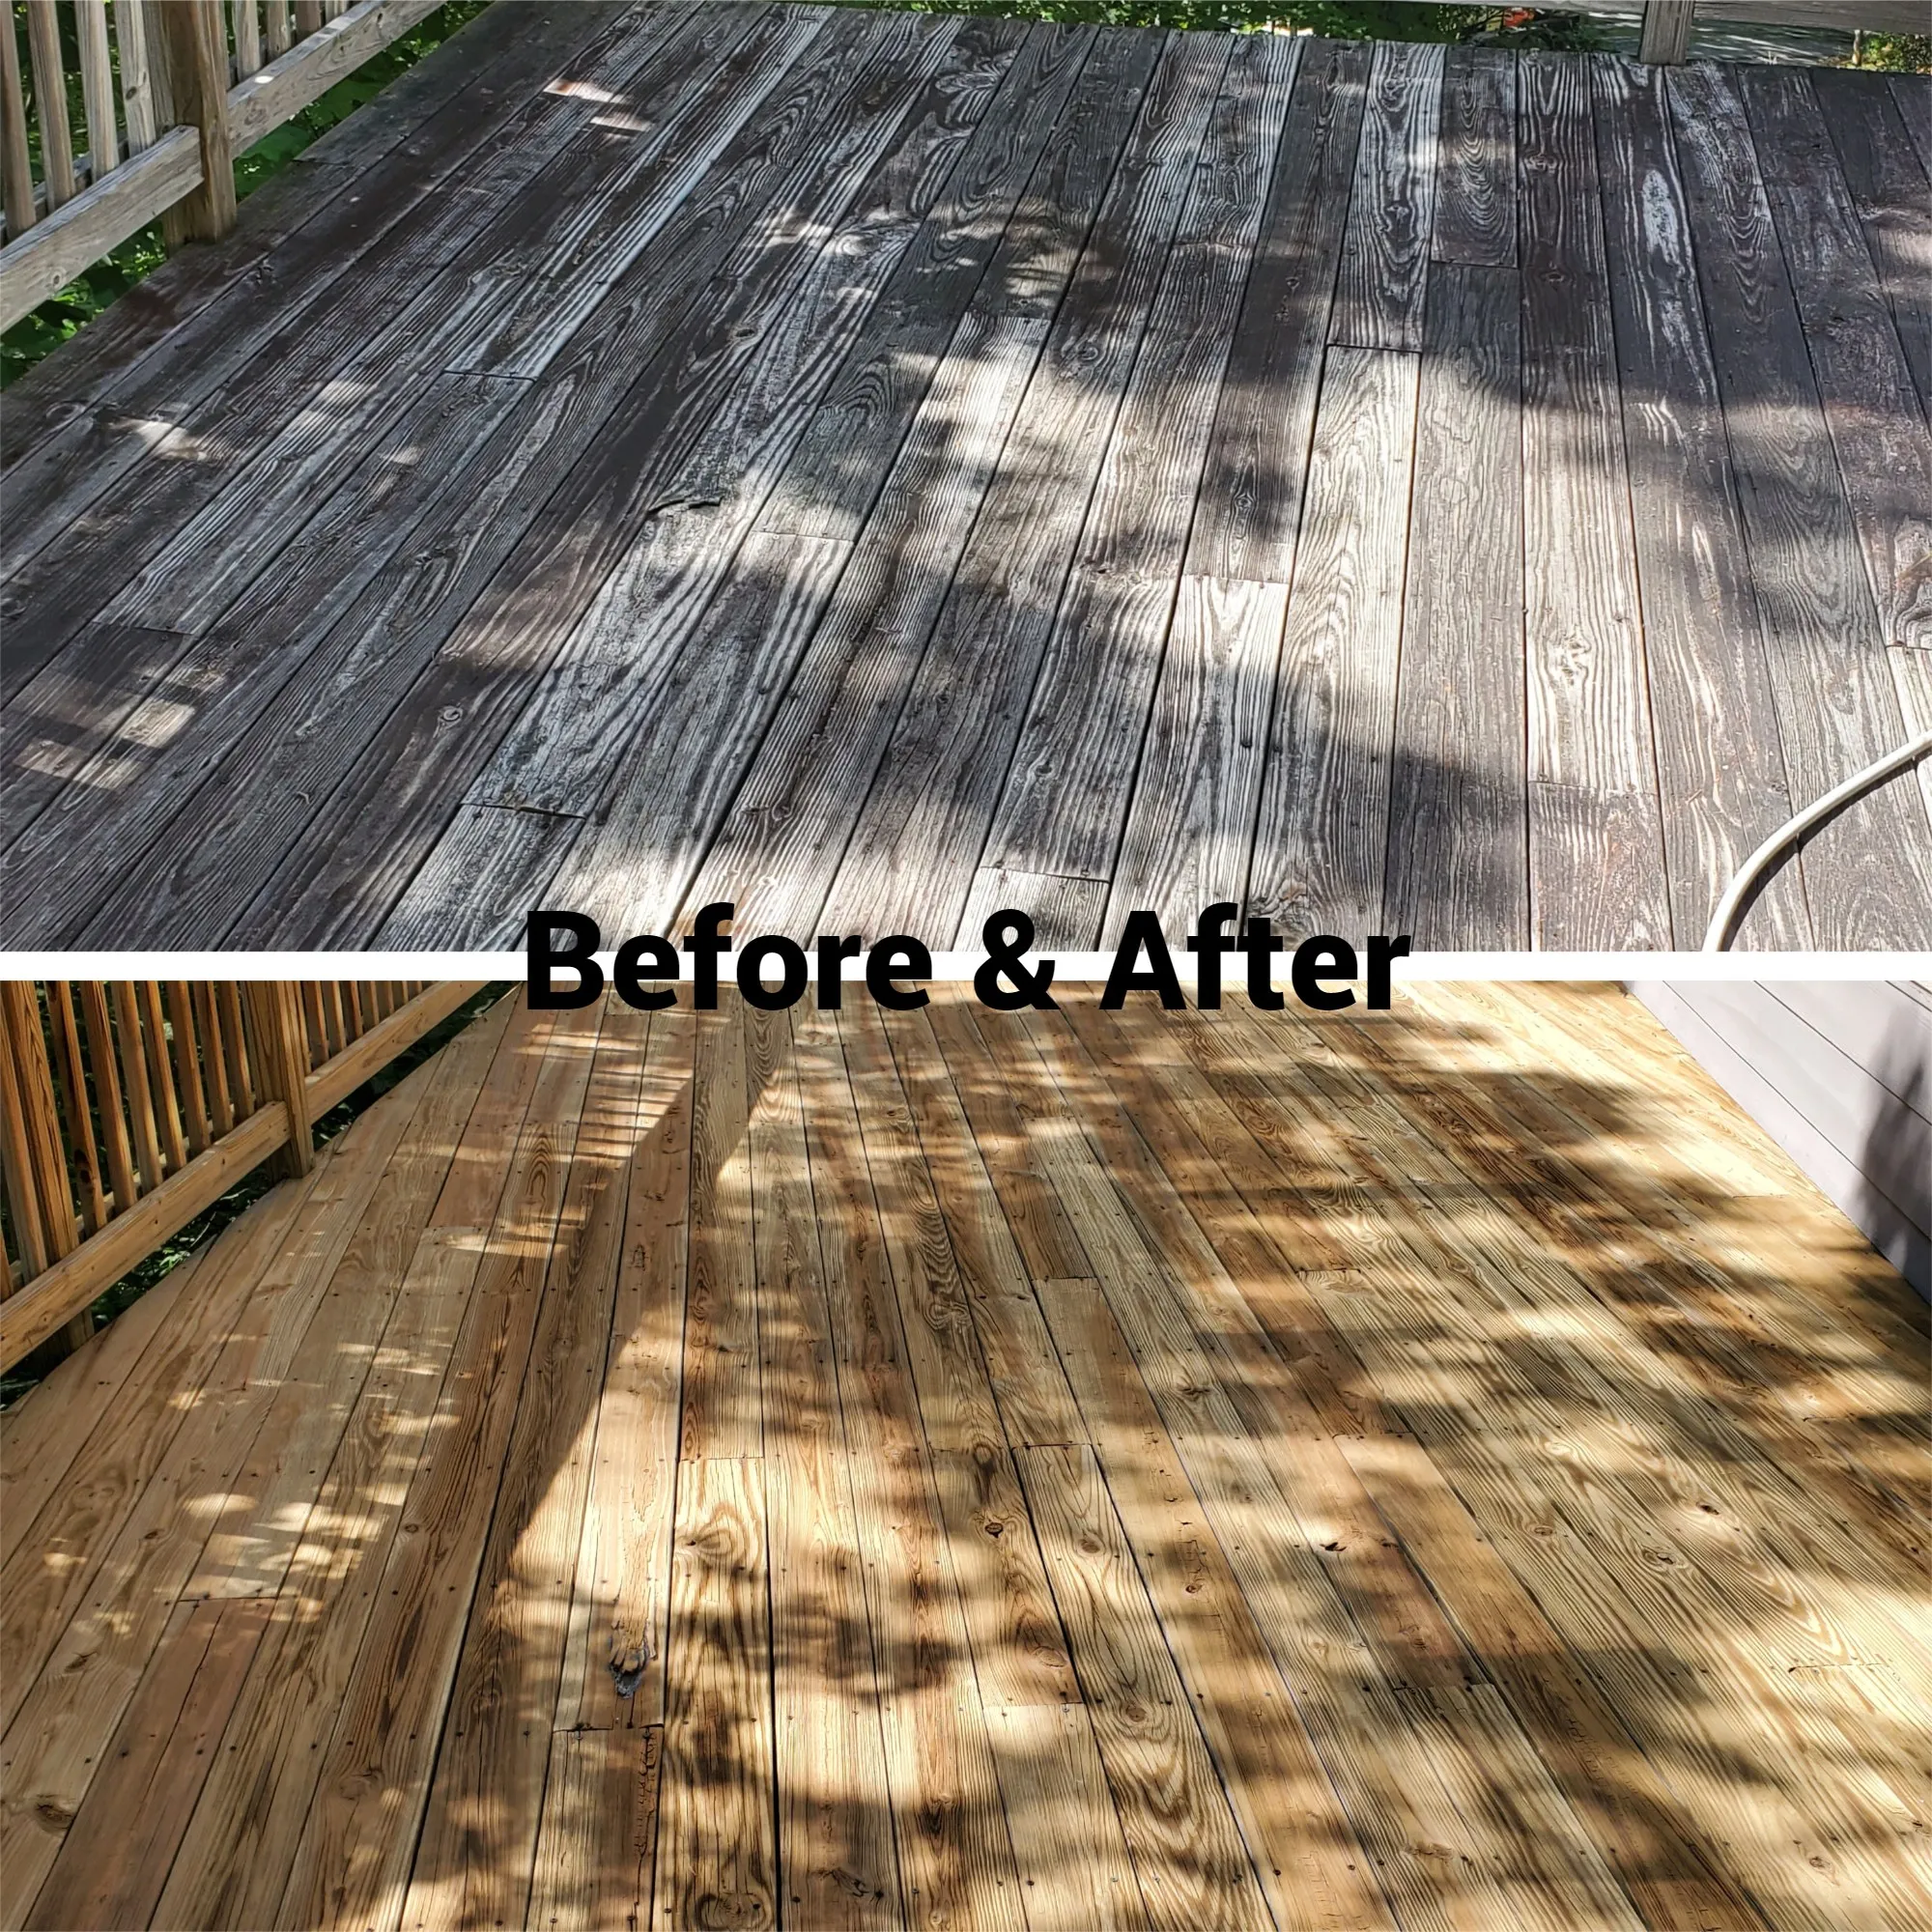 Concrete Cleaning for High Definition Pressure Washing in Asheville, NC